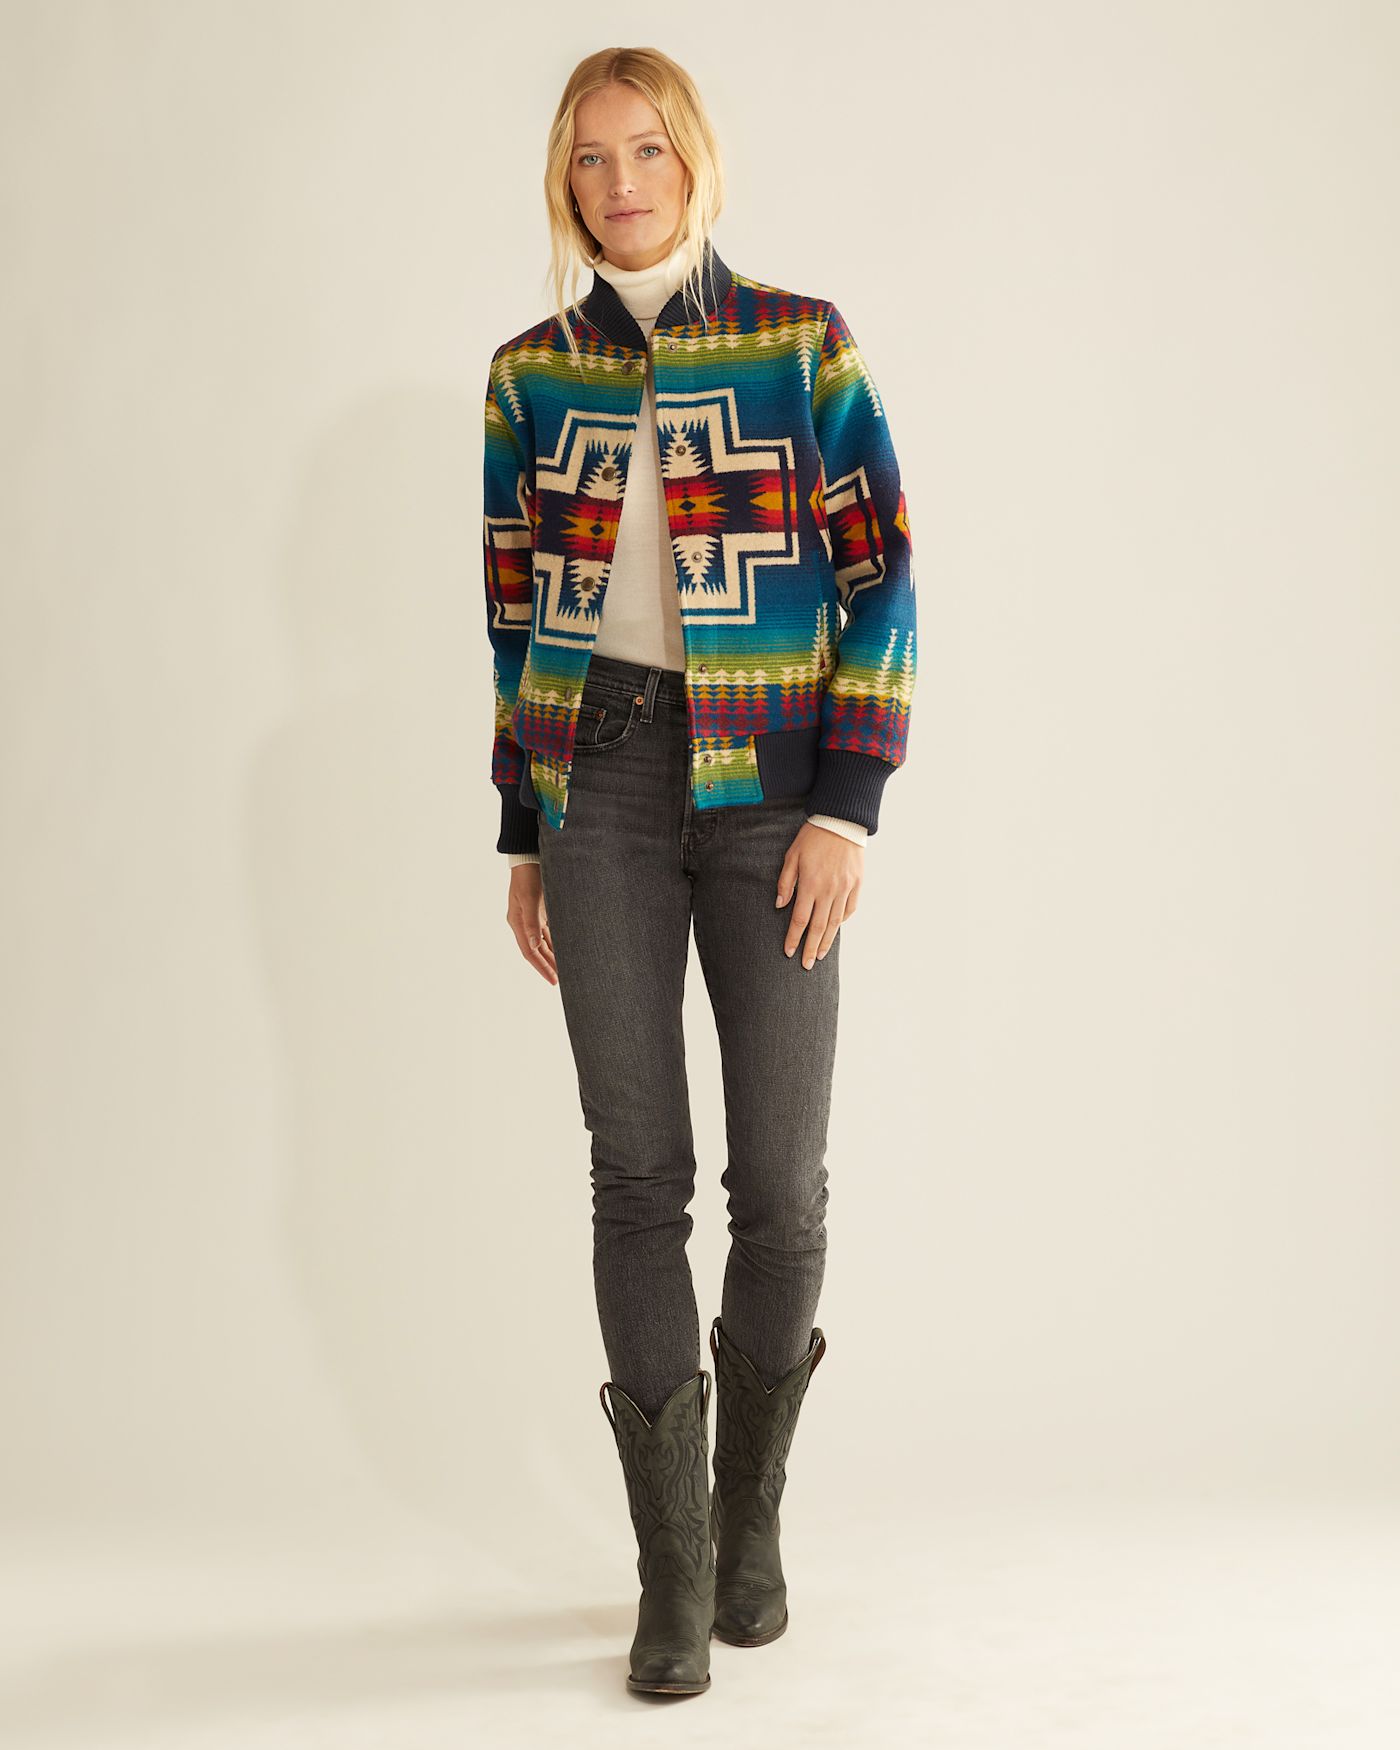 WOMEN'S LIMITED EDITION HARDING WOOL BOMBER